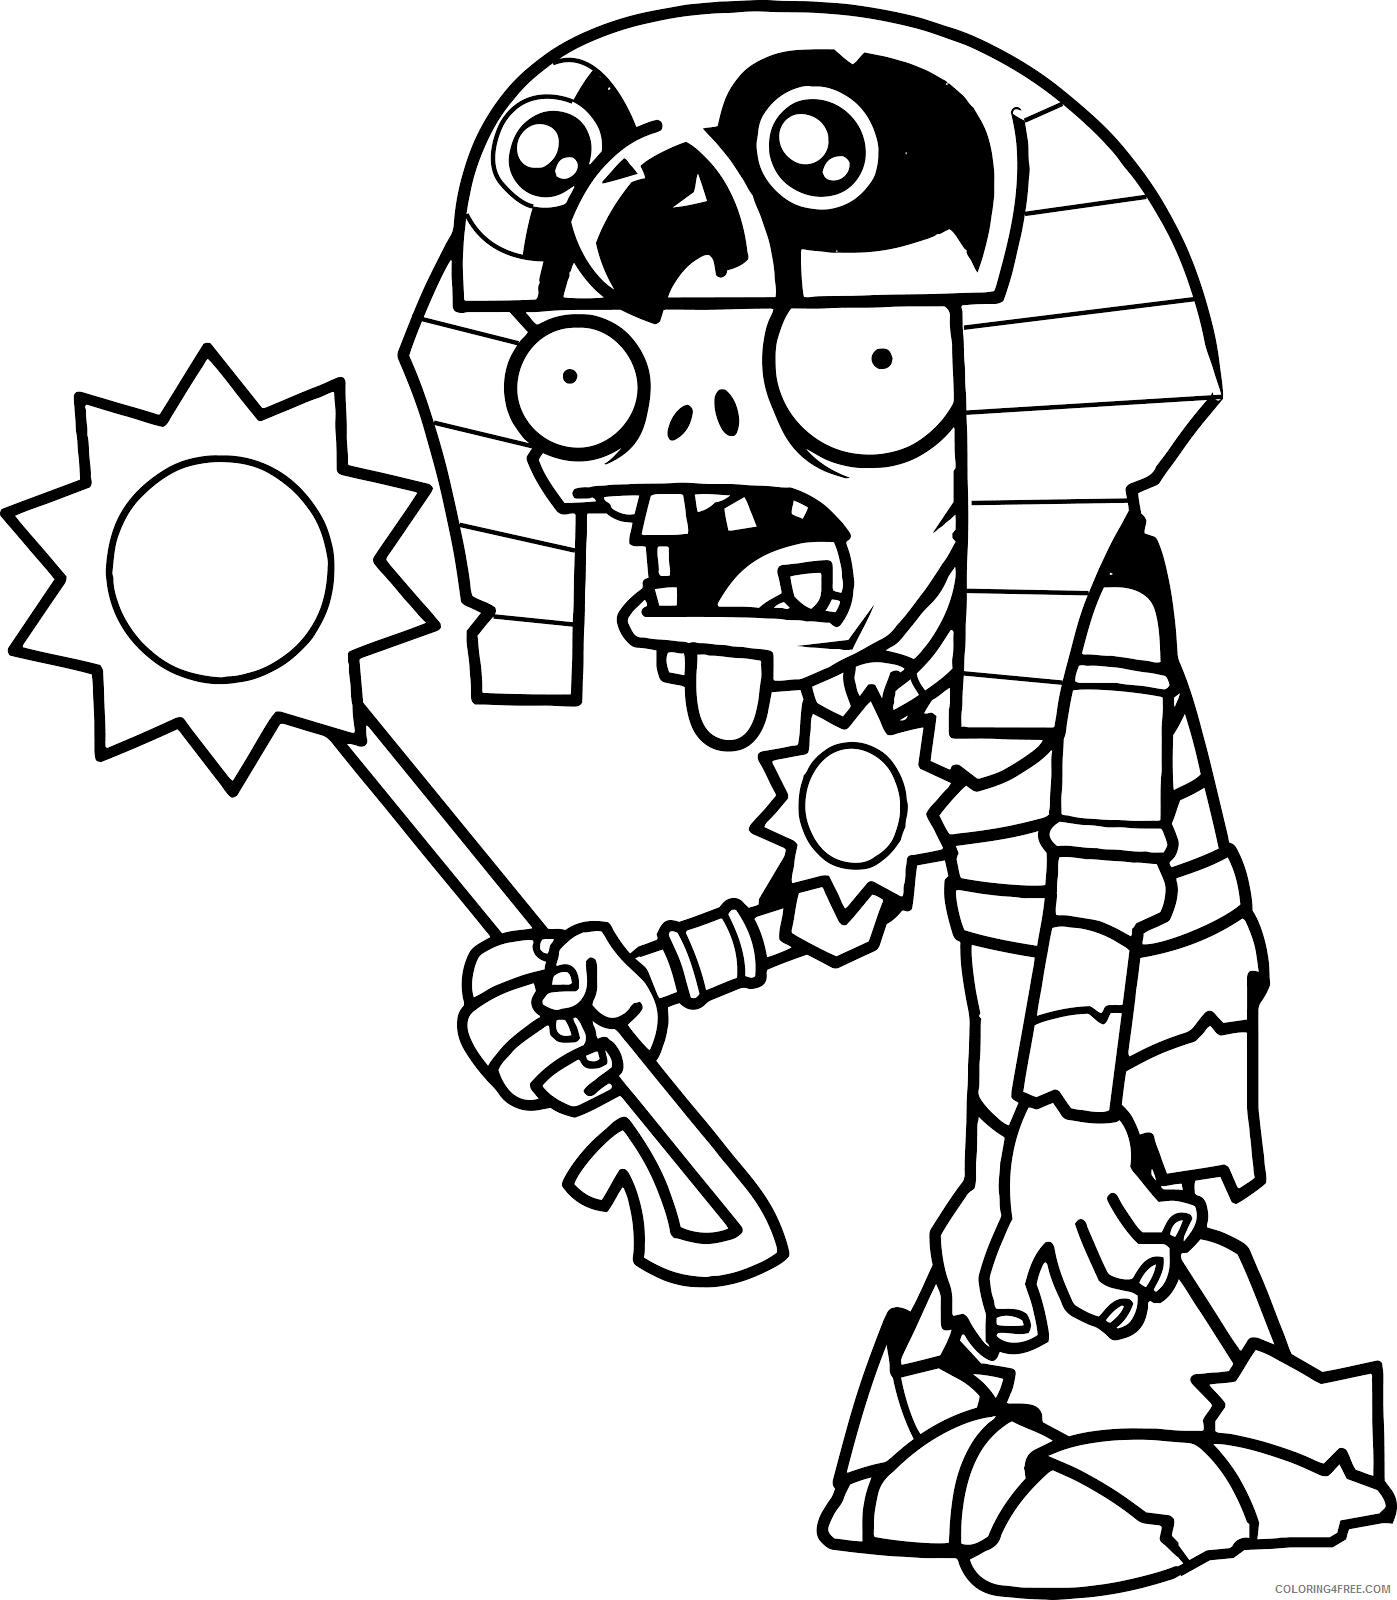 plants vs zombies coloring pages mummy ra zombie Coloring4free